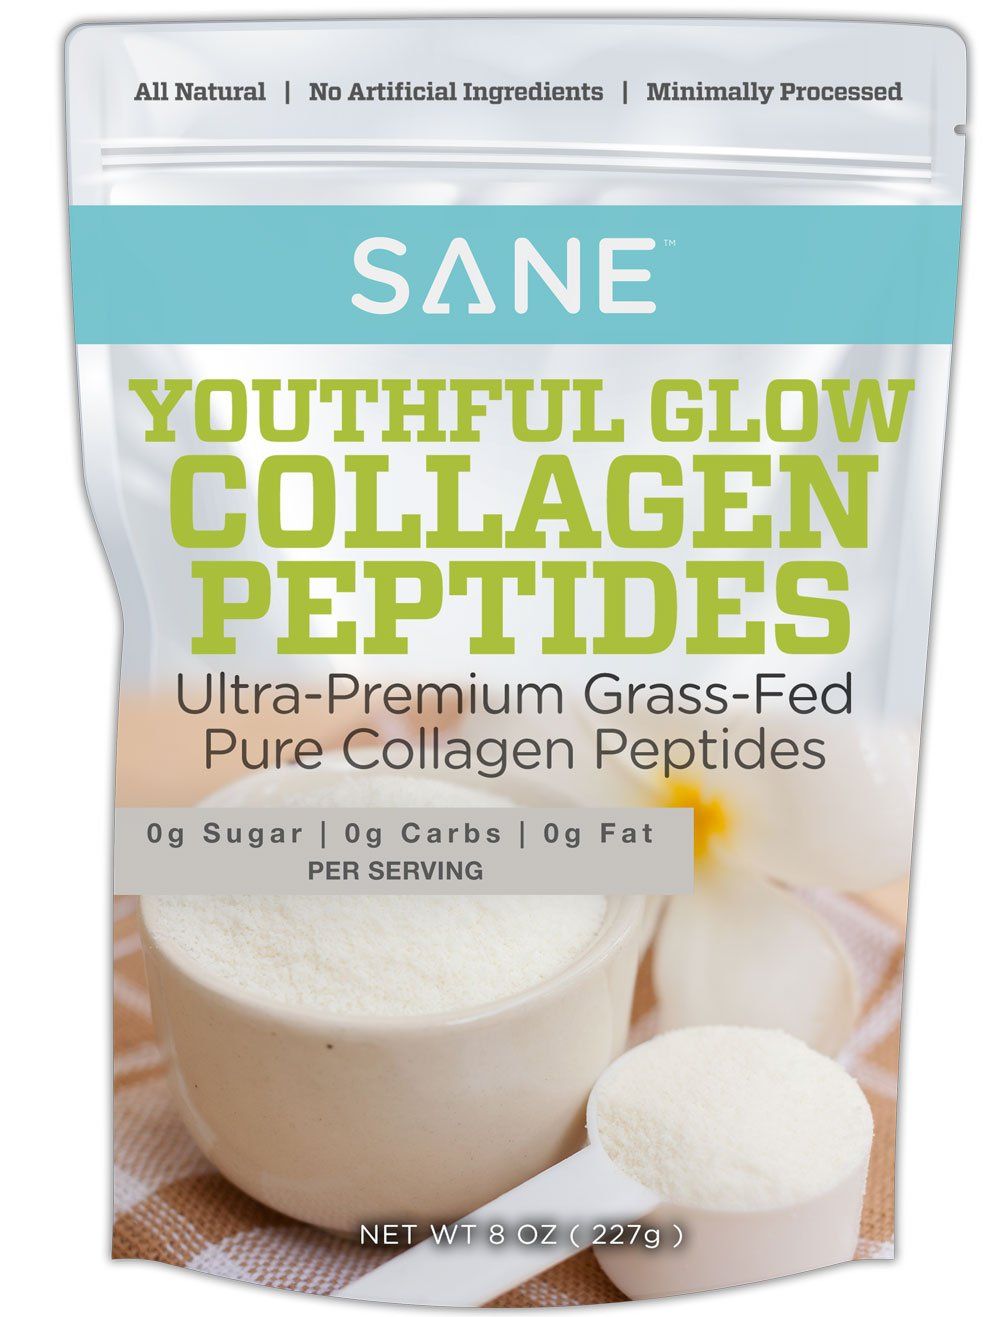 YOUTHFUL GLOW COLLAGEN PEPTIDES